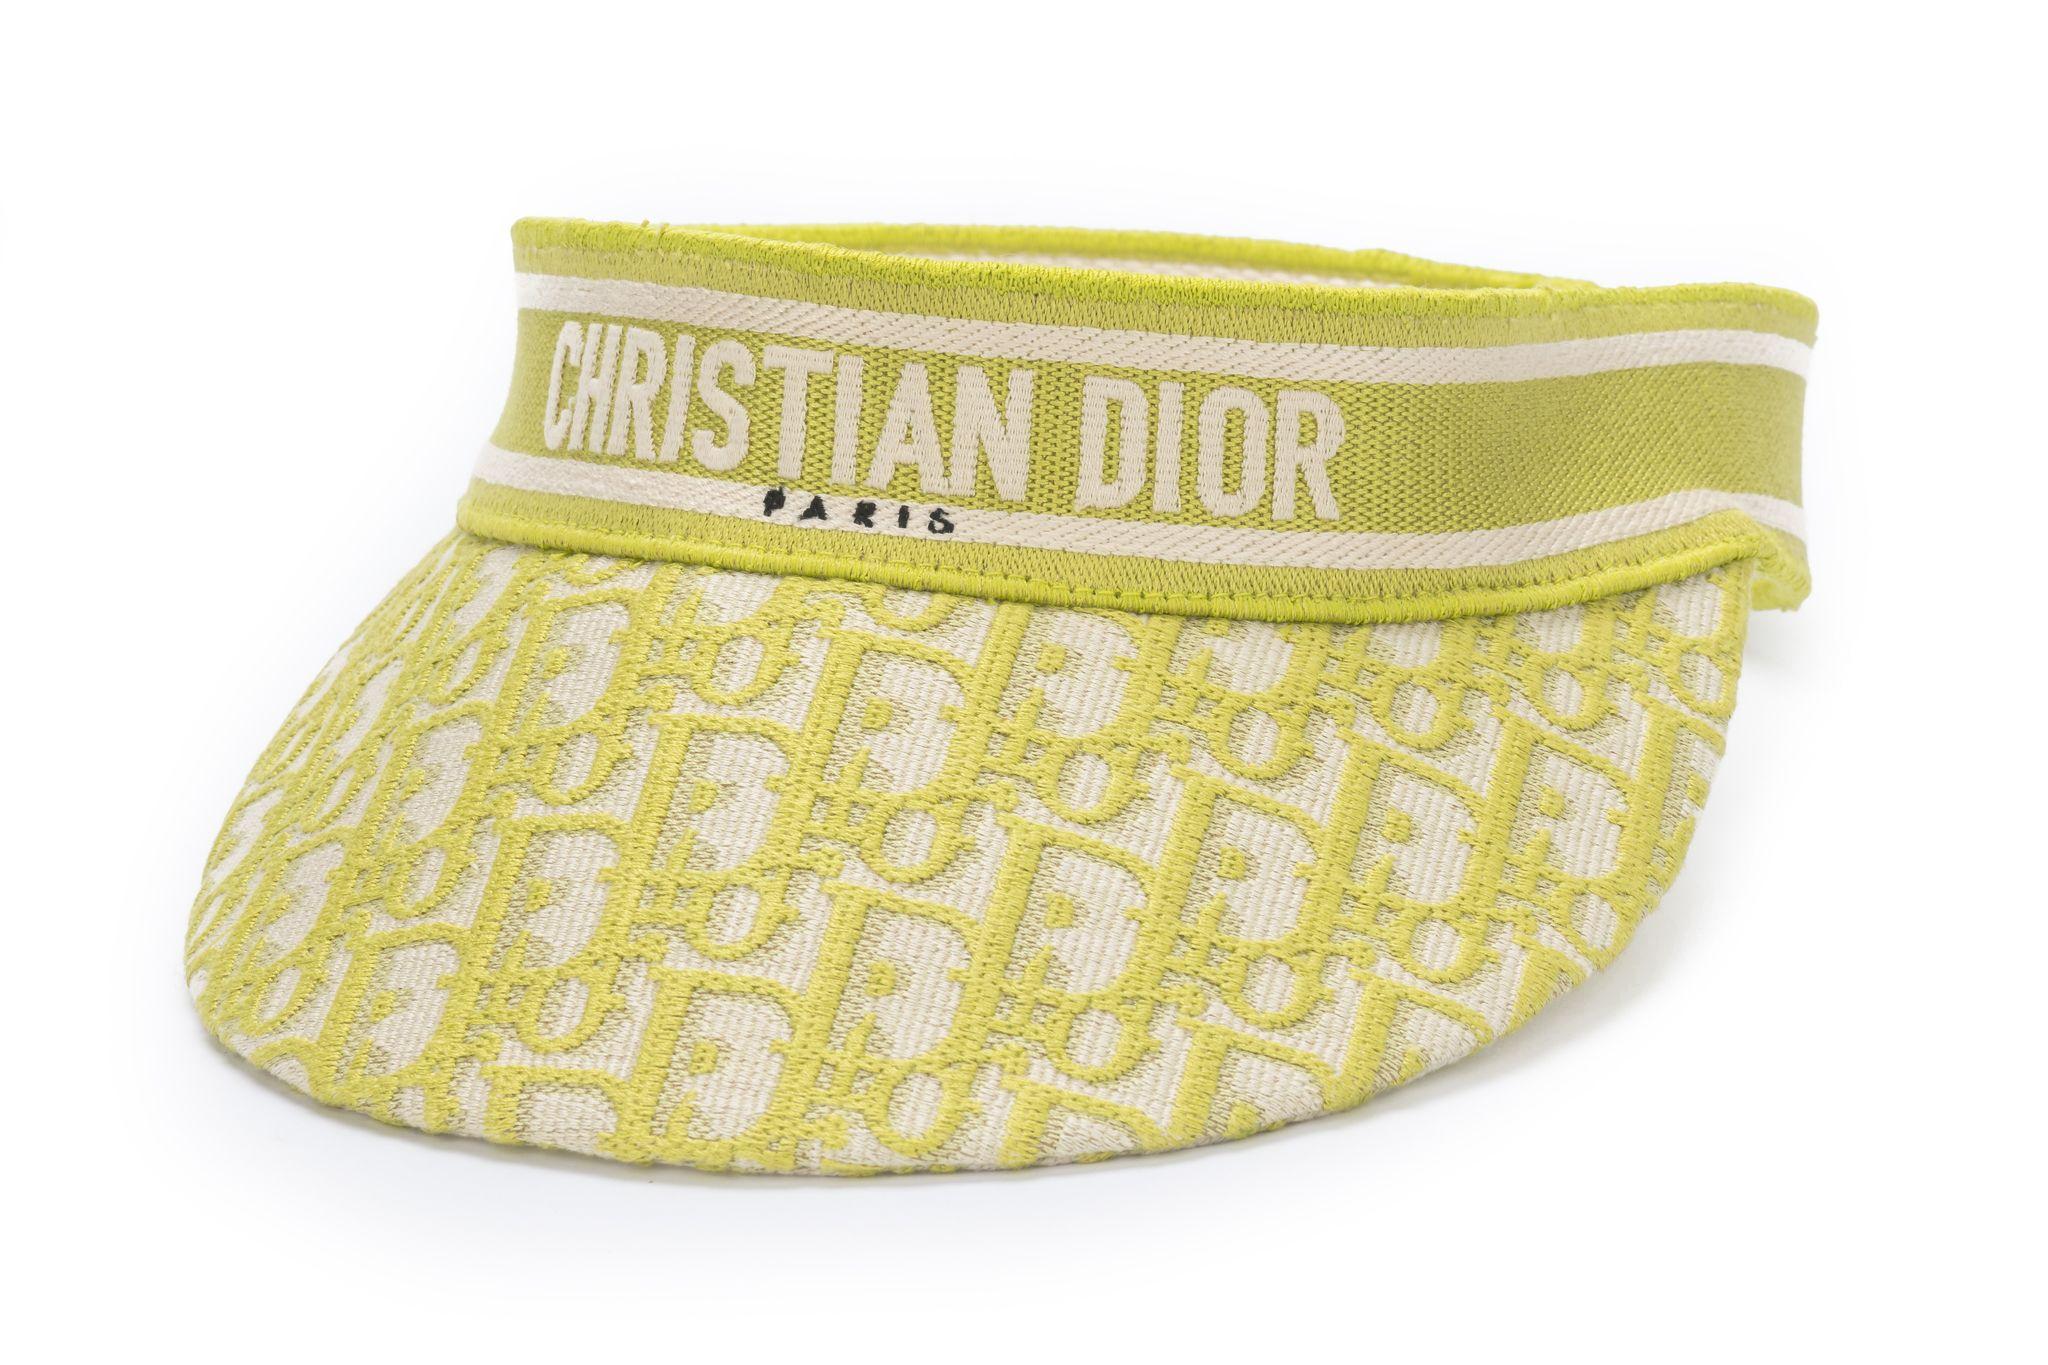 Lime Christian Dior Oblique motif visor. Featuring a tonal embroidered band with 'CHRISTIAN DIOR PARIS' signature. It's new and comes with original dustcover.